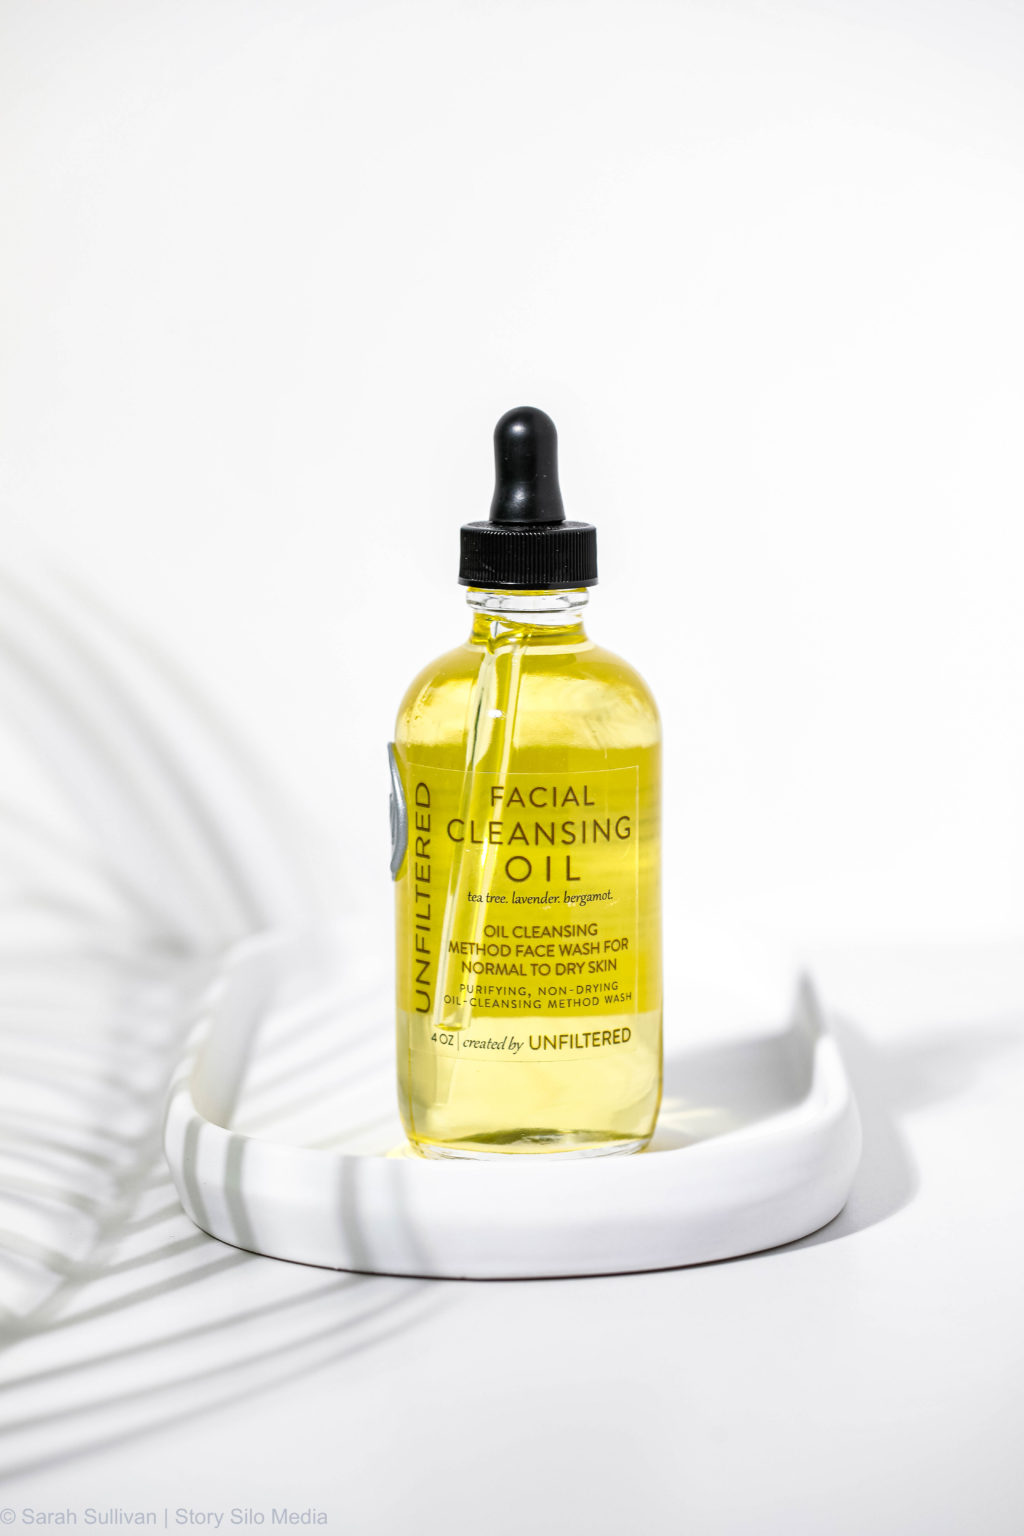 Image of a bottle of Unfiltered facial cleaning oil